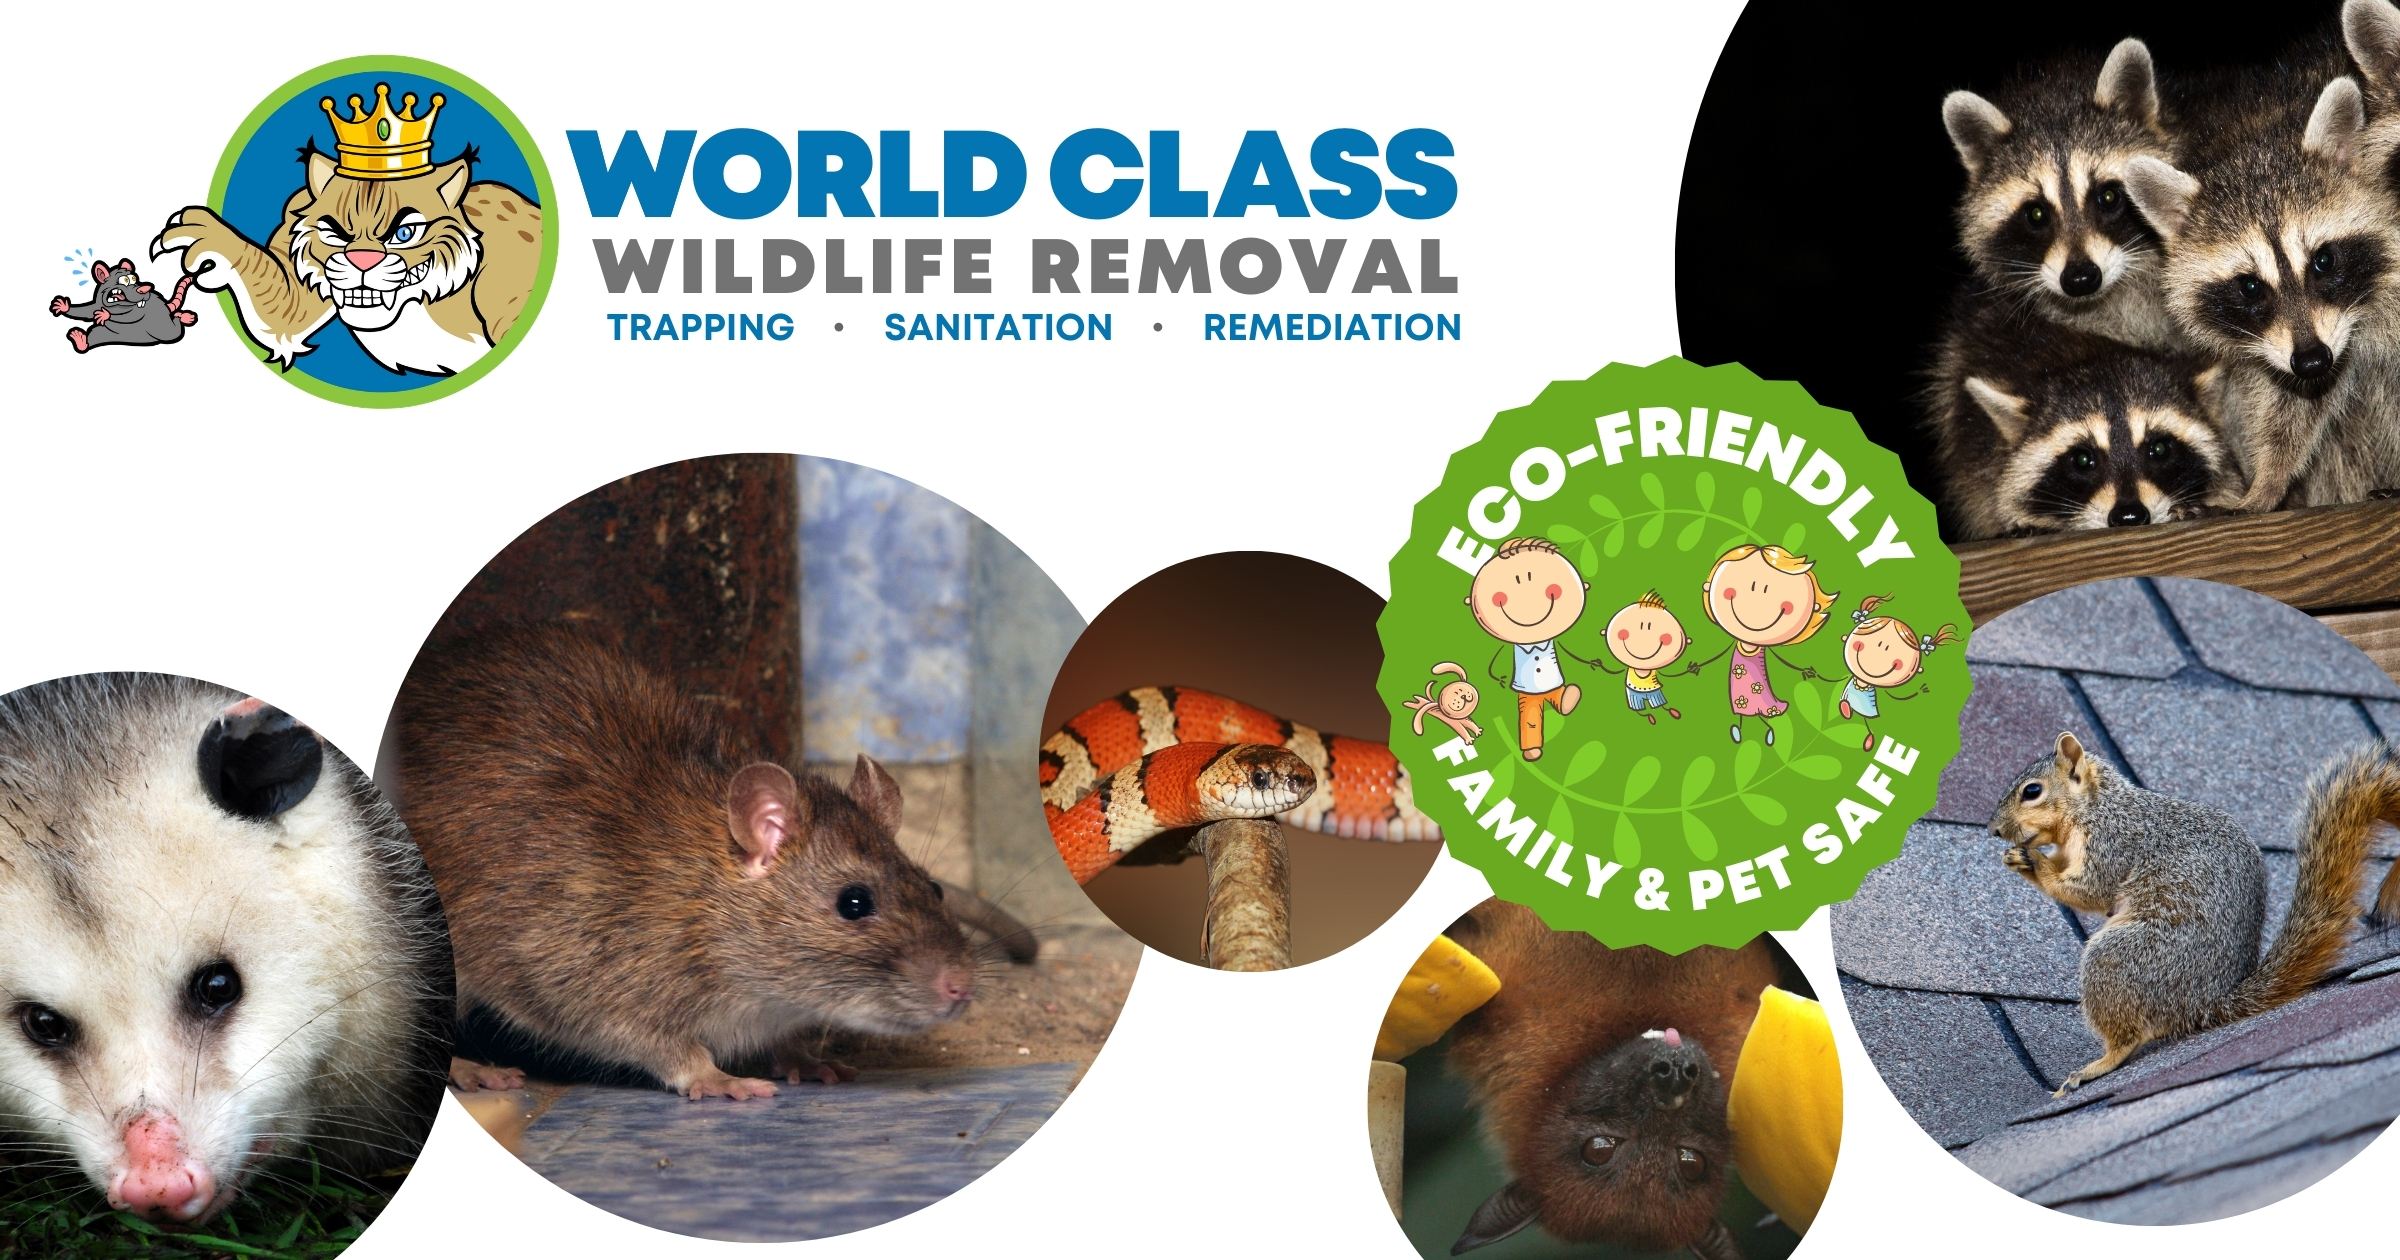 Lowell's Wildlife Removal – Licensed and Insured Wildlife Trapper